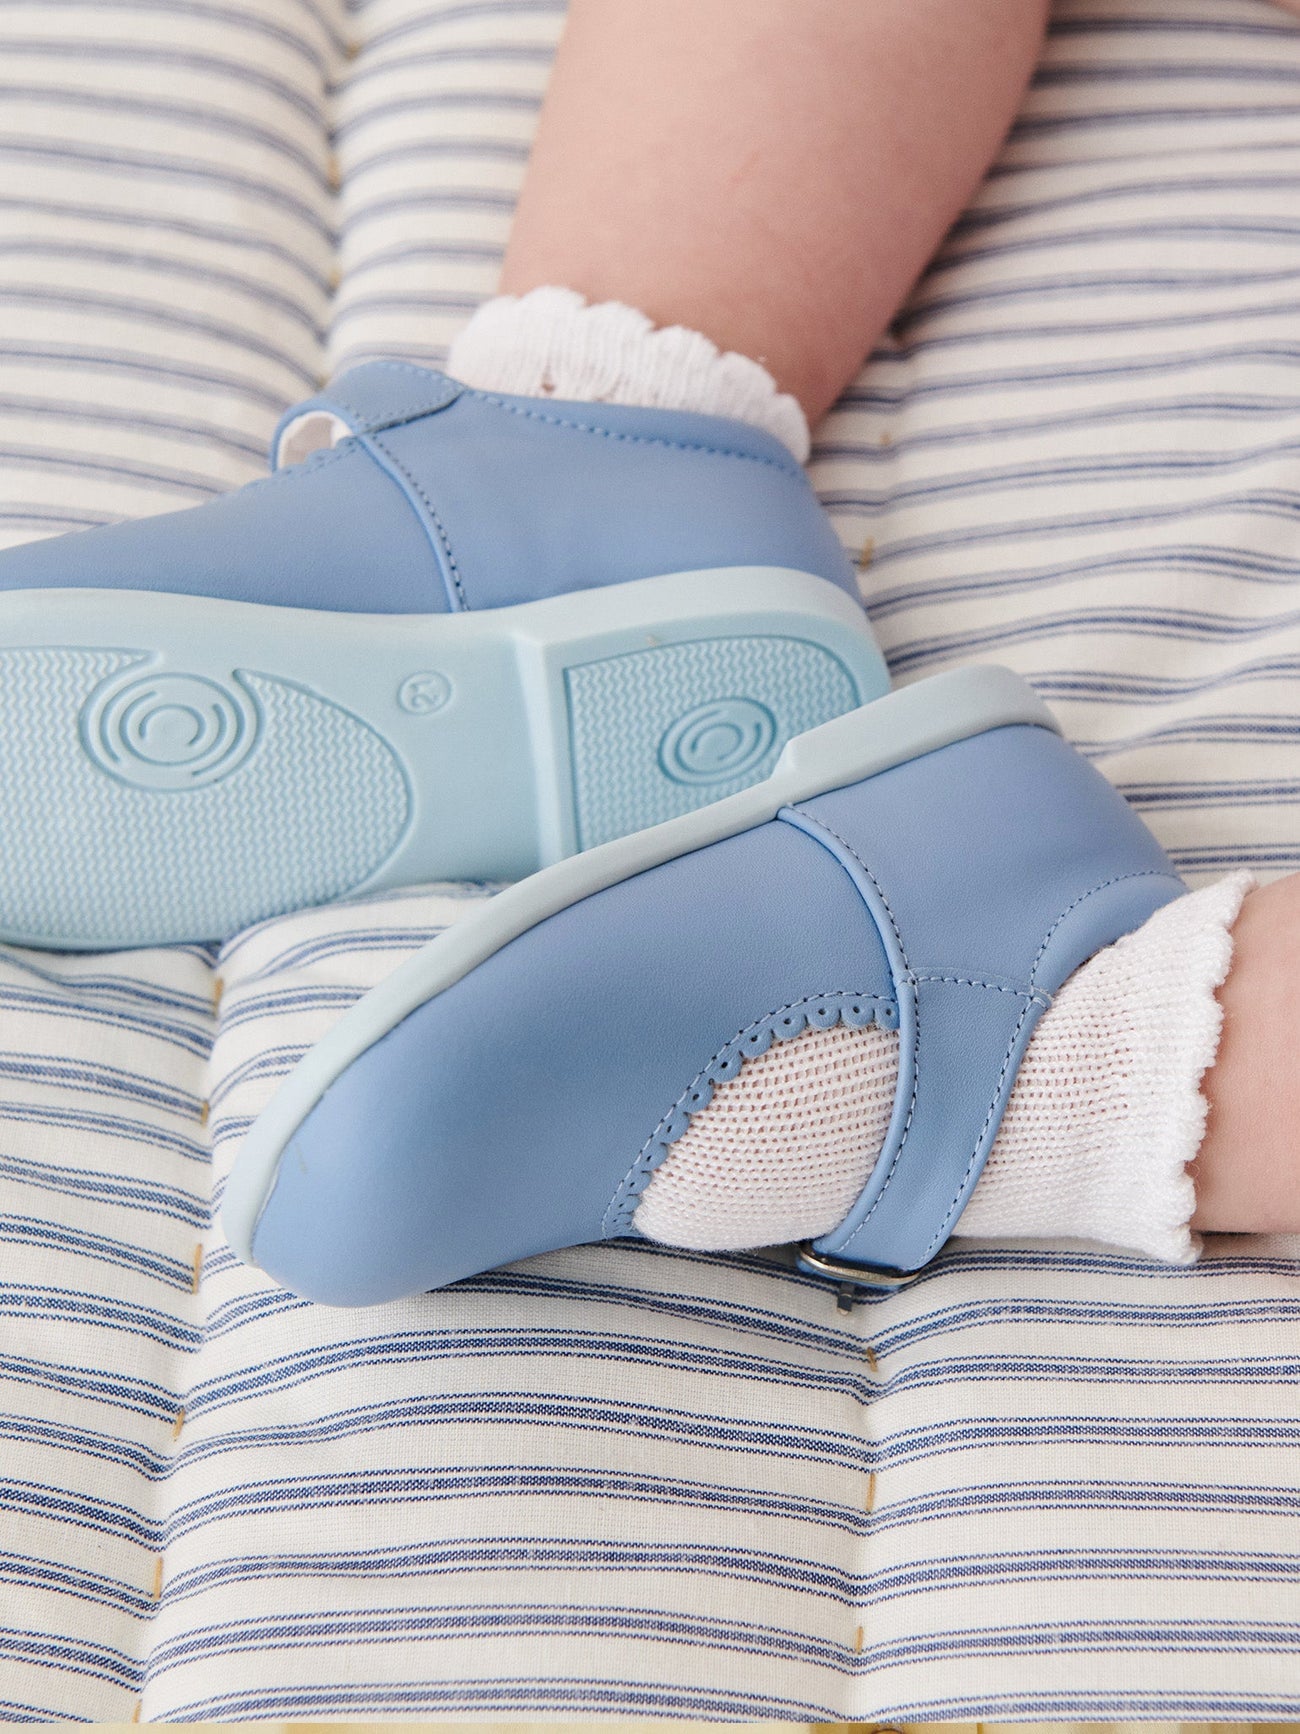 Dusty Blue Leather Toddler Mary Jane Shoes